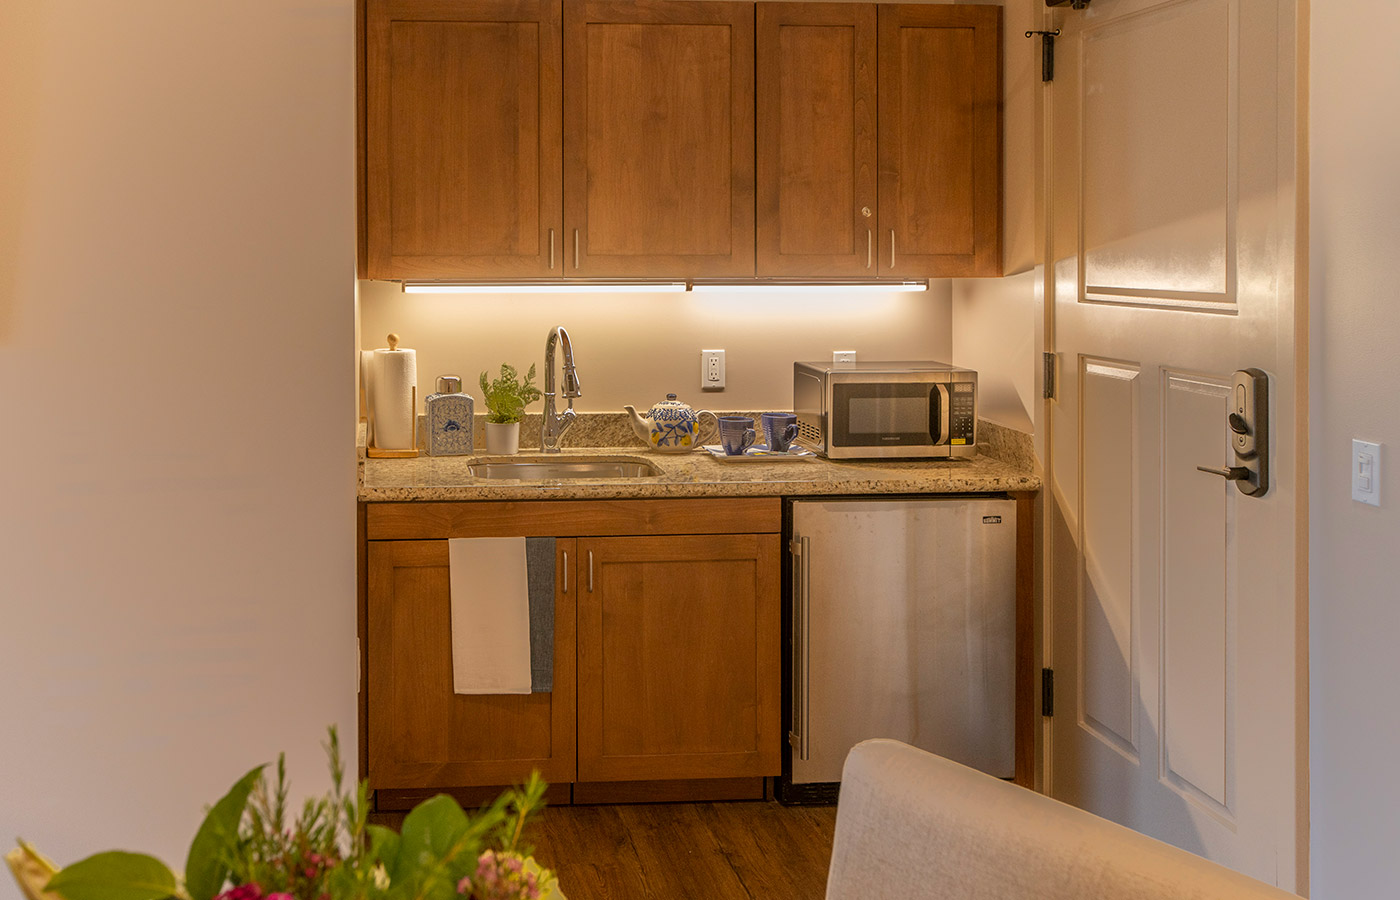 Kitchen with sink, refrigerator, and seating area.
